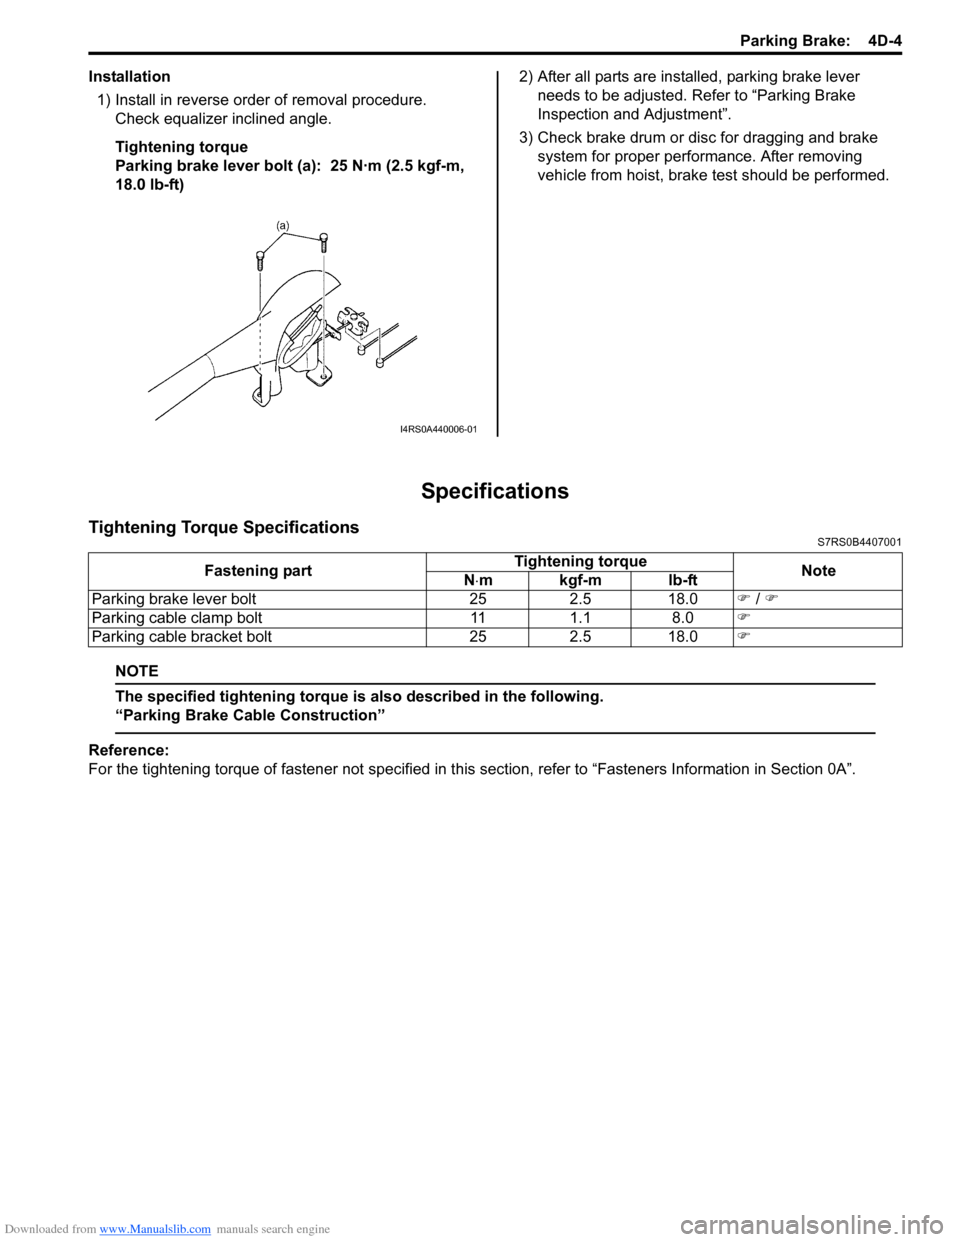 SUZUKI SWIFT 2008 2.G Service Workshop Manual Downloaded from www.Manualslib.com manuals search engine Parking Brake:  4D-4
Installation1) Install in reverse order of removal procedure. Check equalizer inclined angle.
Tightening torque
Parking br